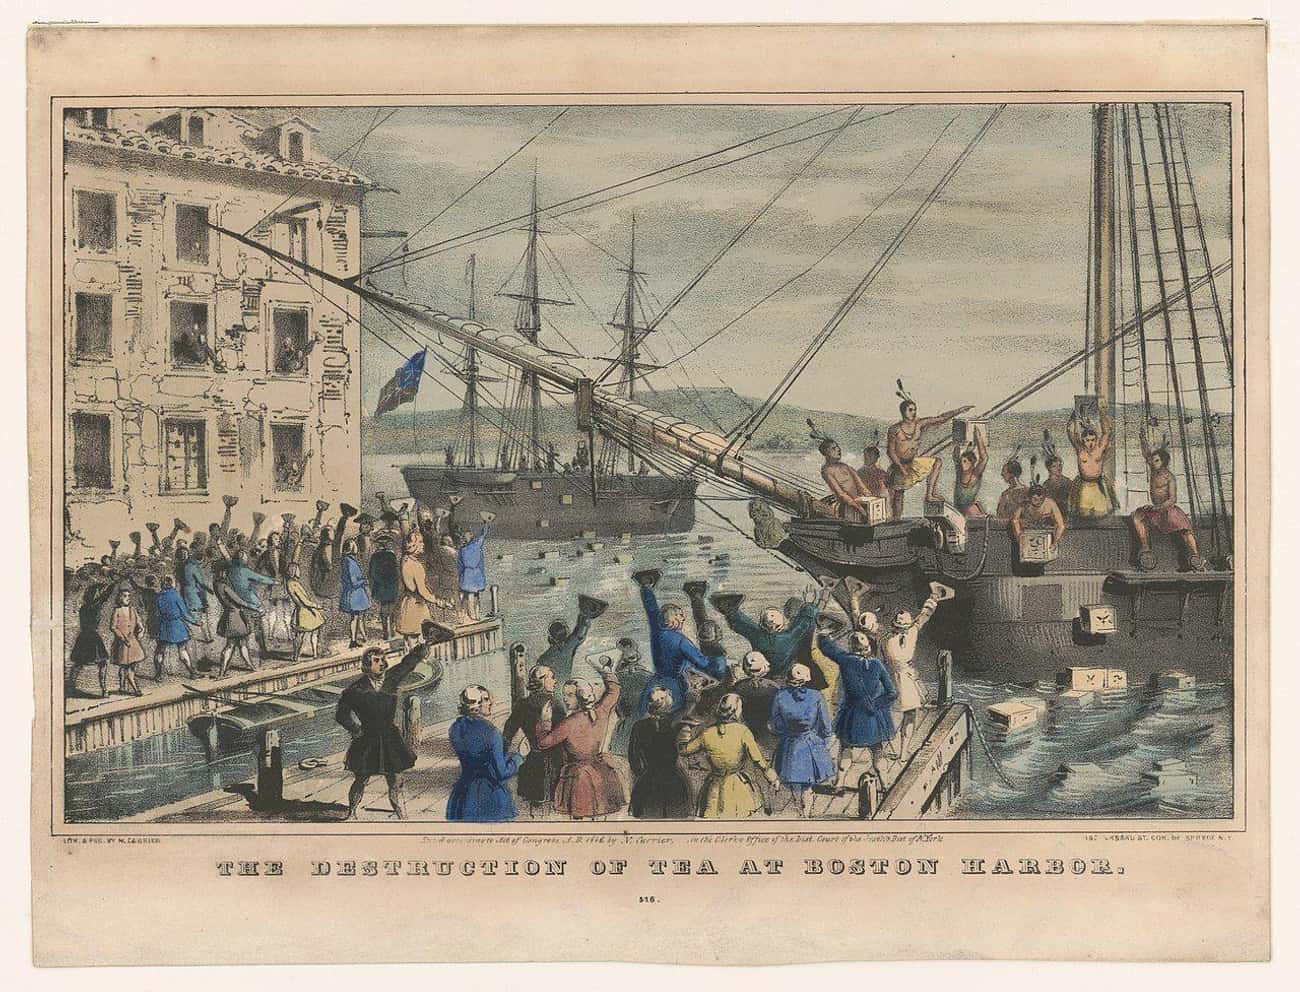 The Boston Tea Party And The Civil War Helped Make Americans Coffee Drinkers